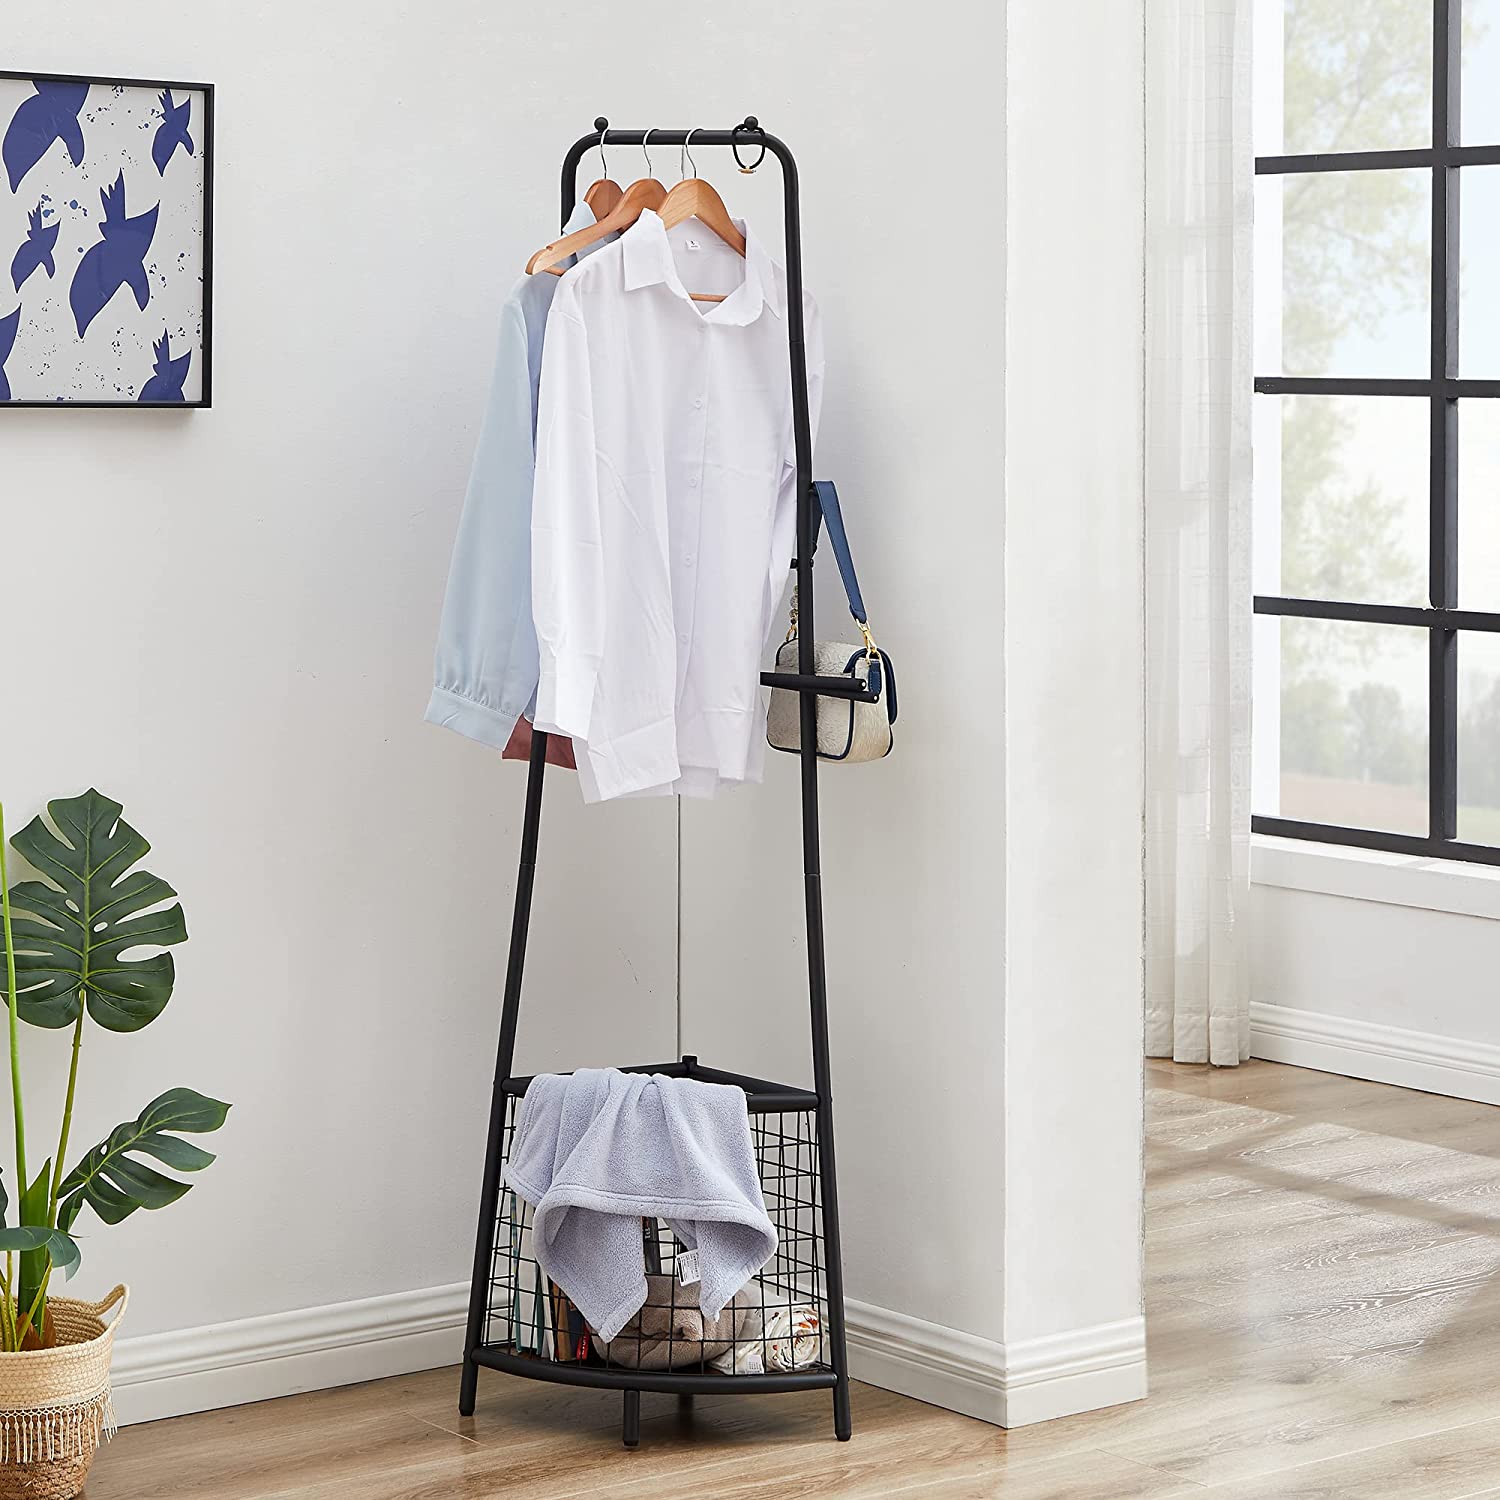 VECELO Freestanding Coat Rack with Metal Basket, Hall Trees with Steel Frame, Space Saving Cloth Hanger